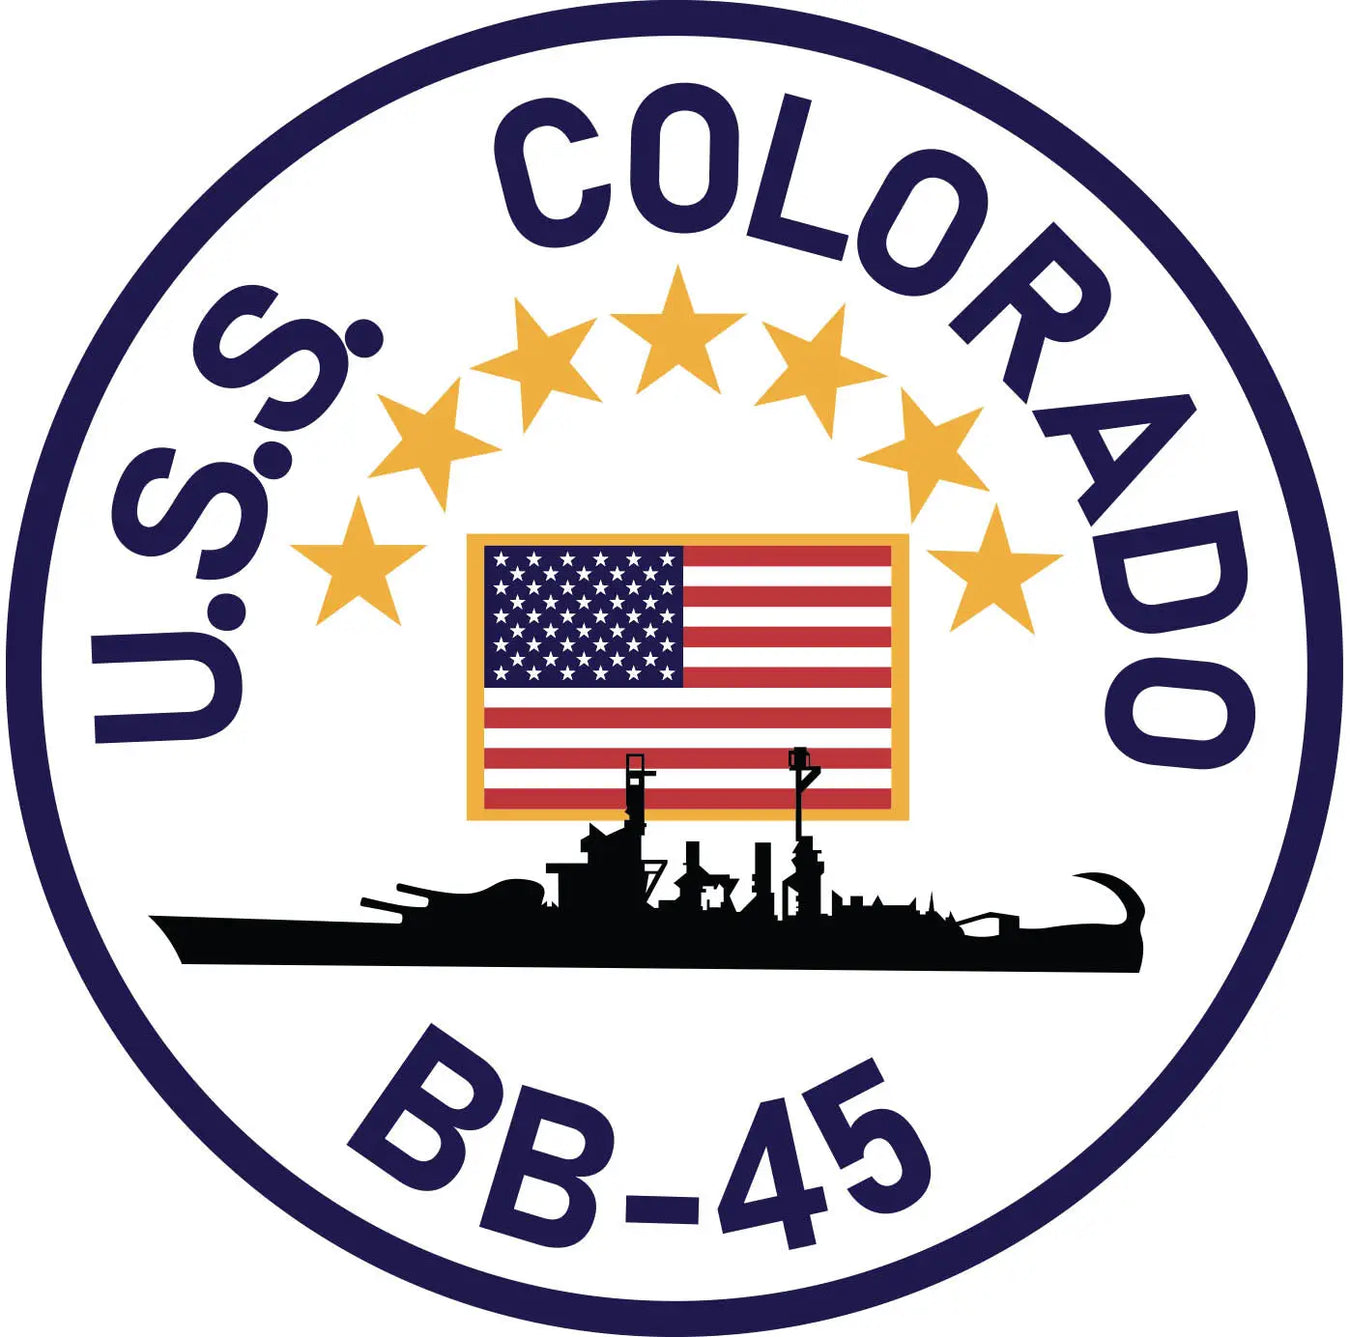 USS Colorado (BB-45) Merchandise - Shop T-Shirts, hoodies, patches, pins, flags, decals, hats and more.